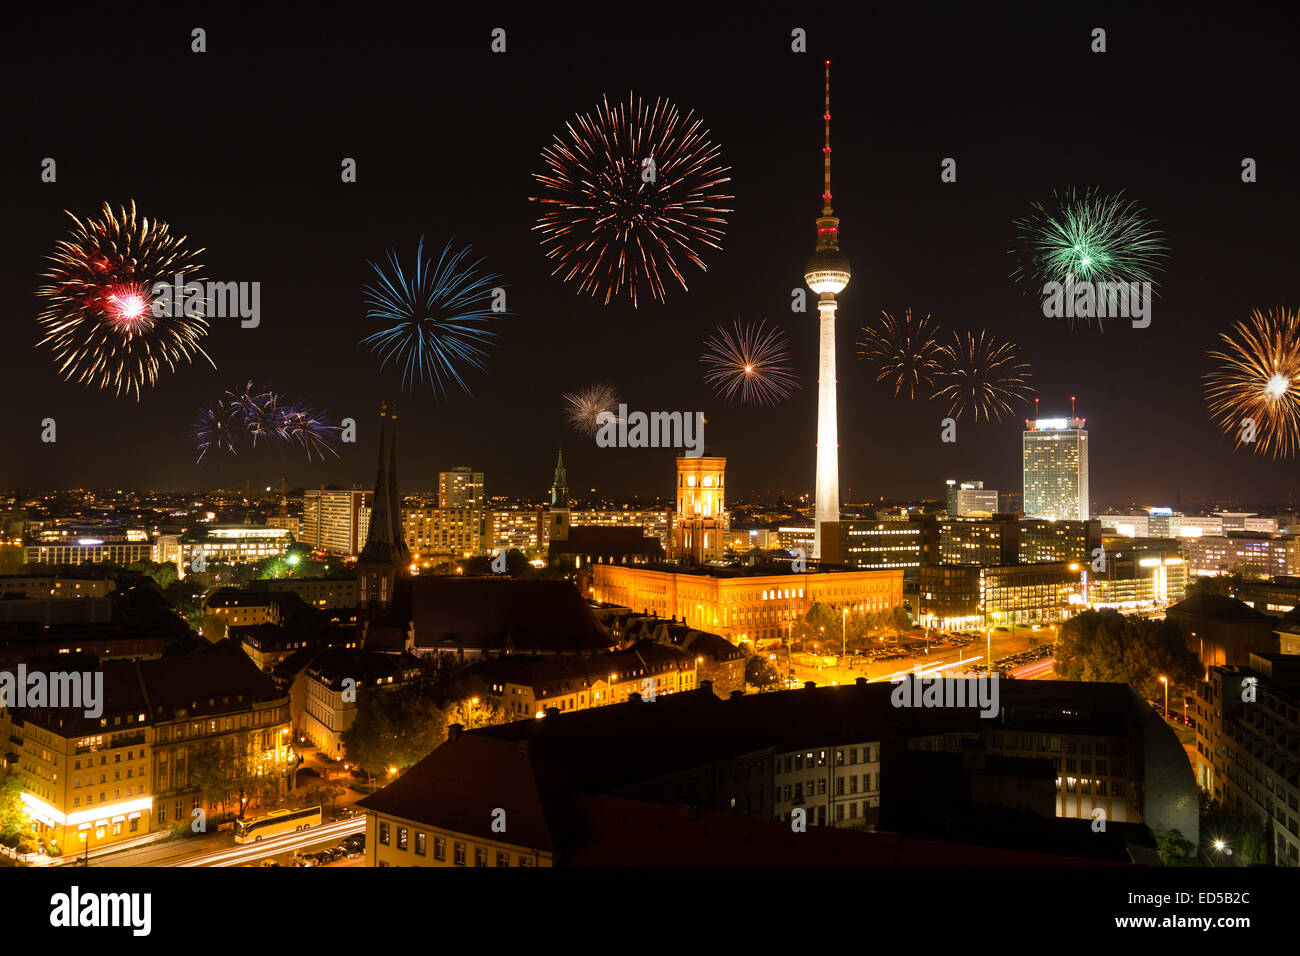 fireworks on new year's eve in berlin Stock Photo Alamy